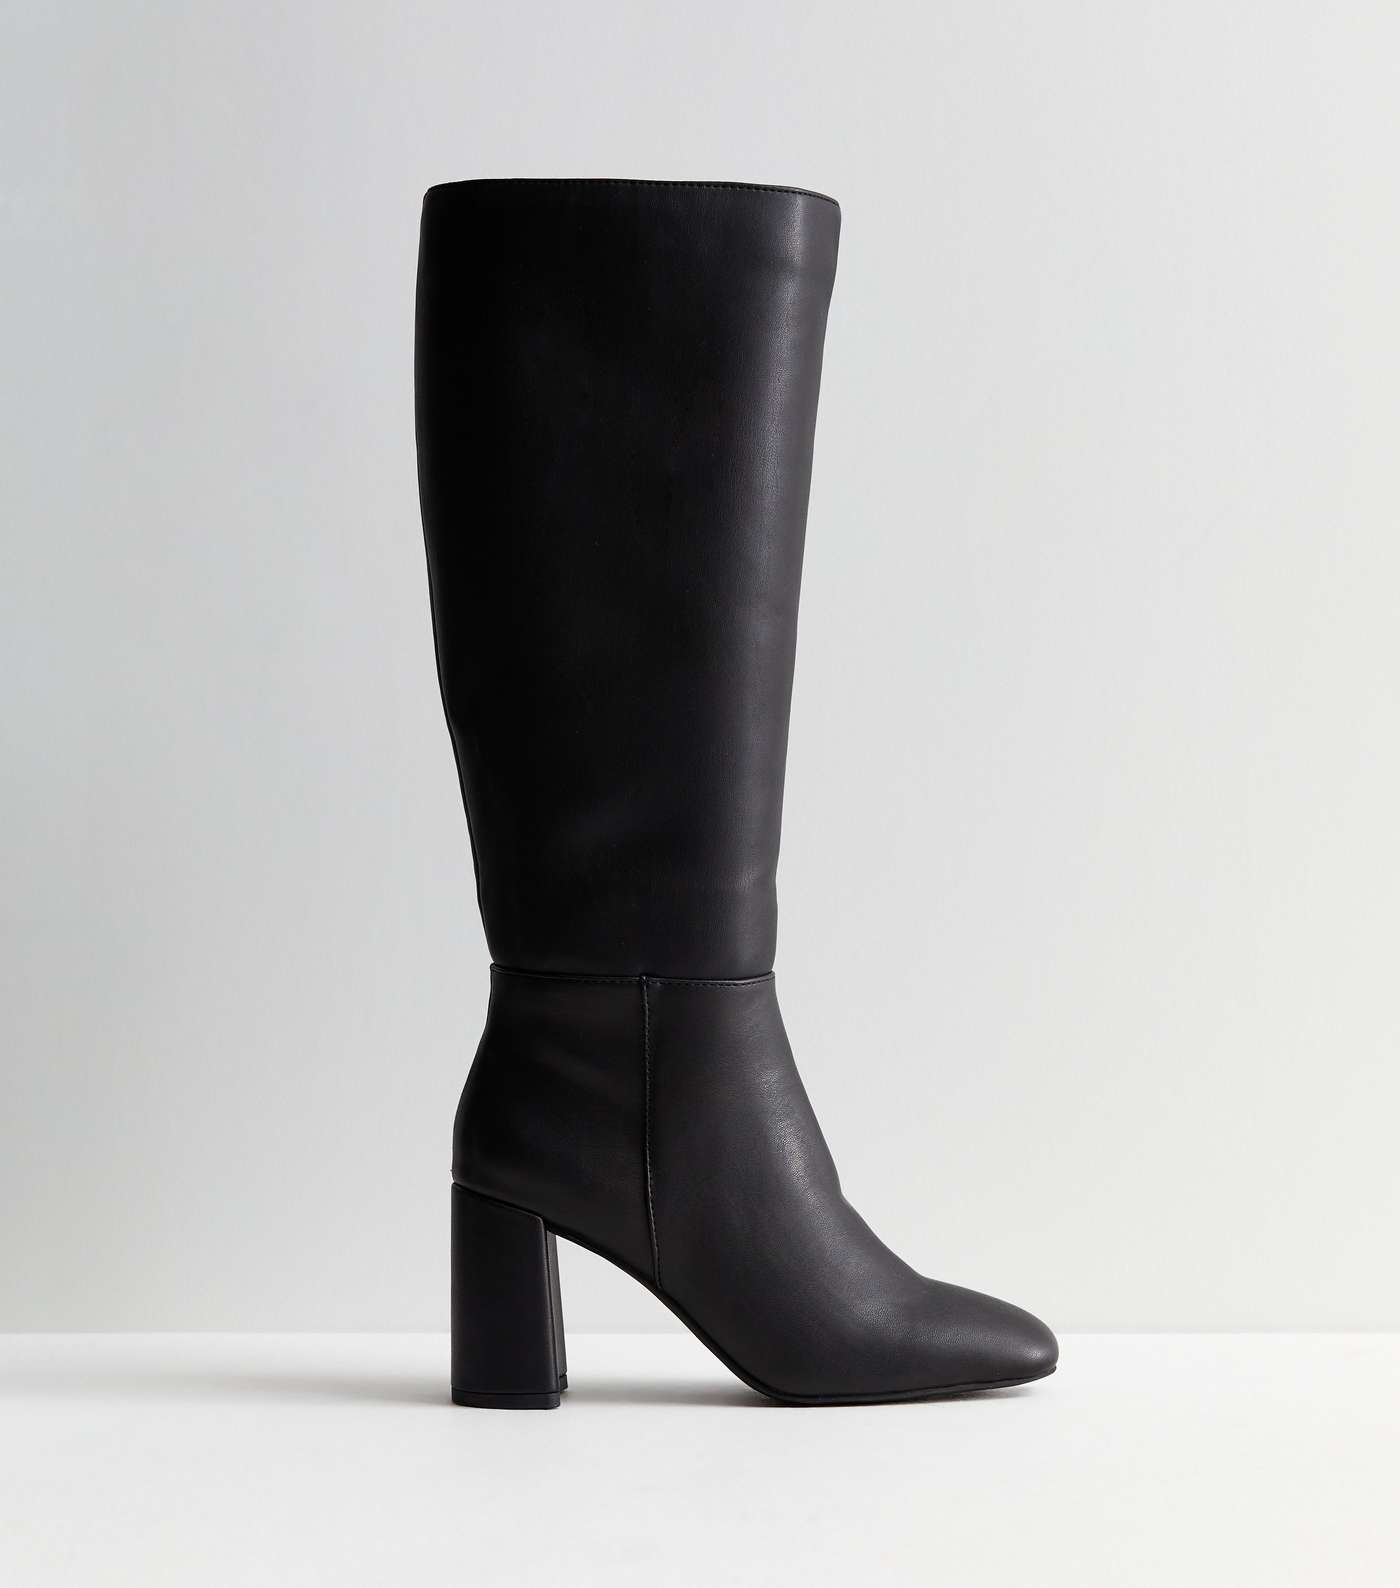 Black Leather-Look Stretch Block Heel Knee High Boots Image 5